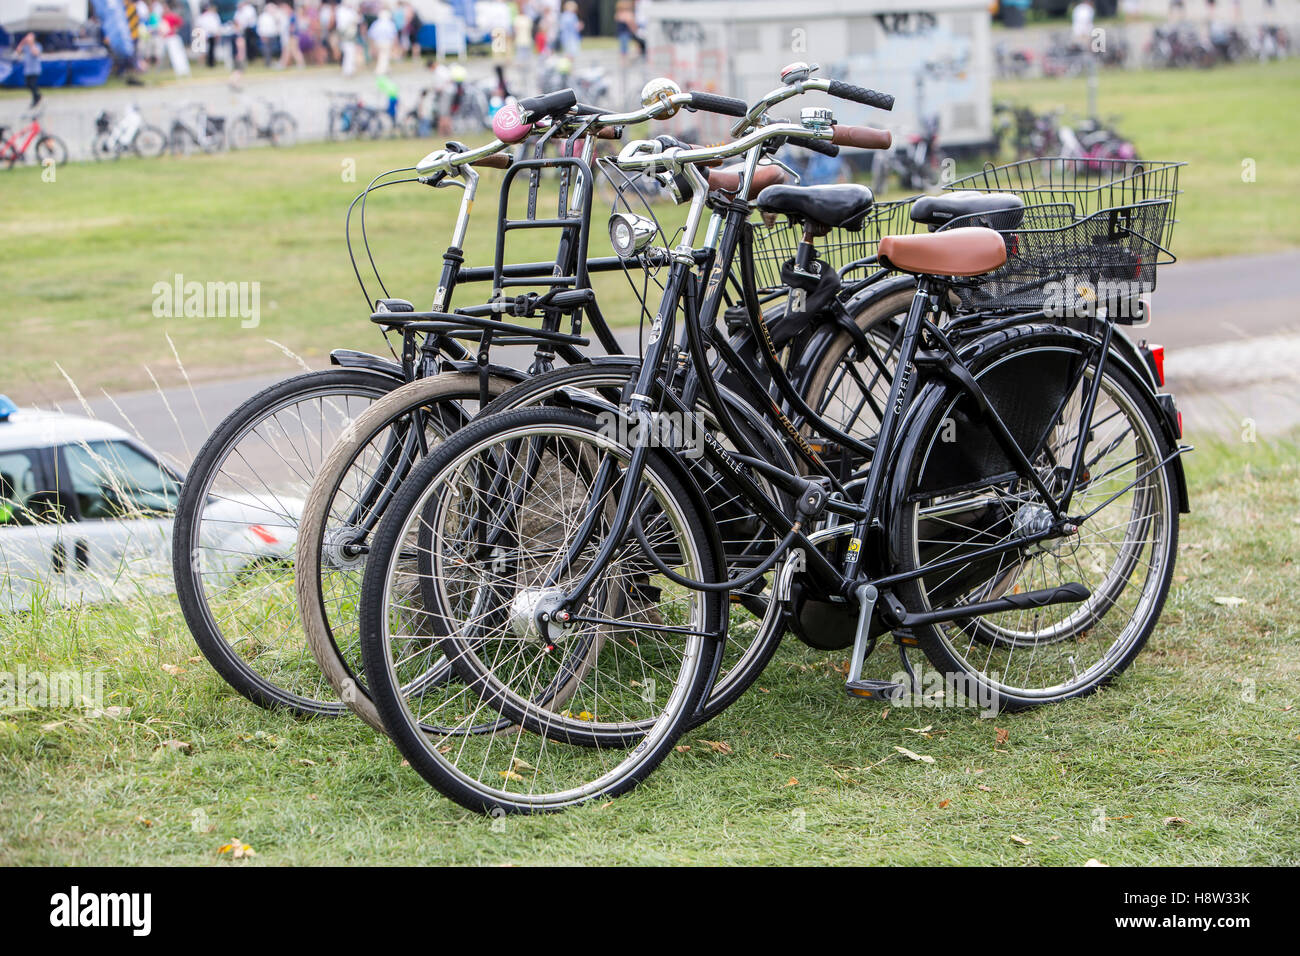 Hollandrad High Resolution Stock Photography and Images - Alamy